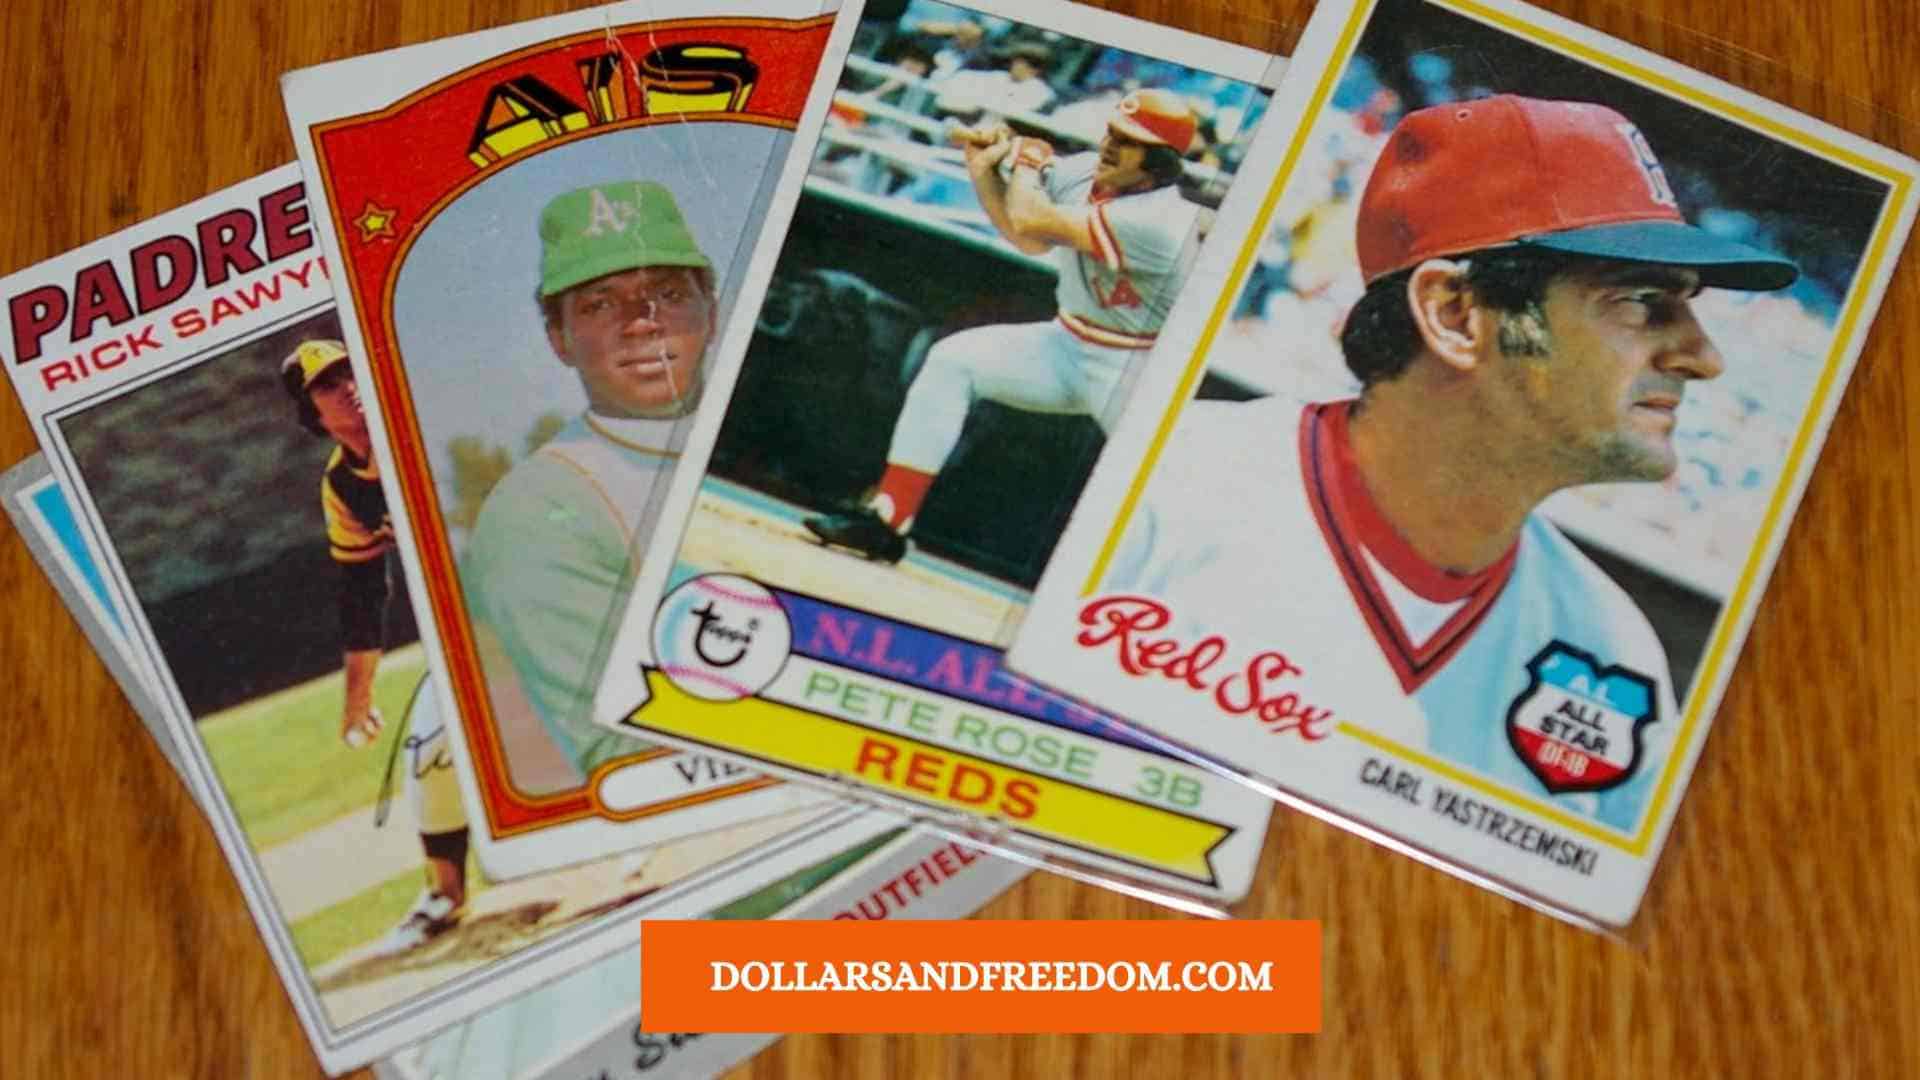 where to sell baseball cards